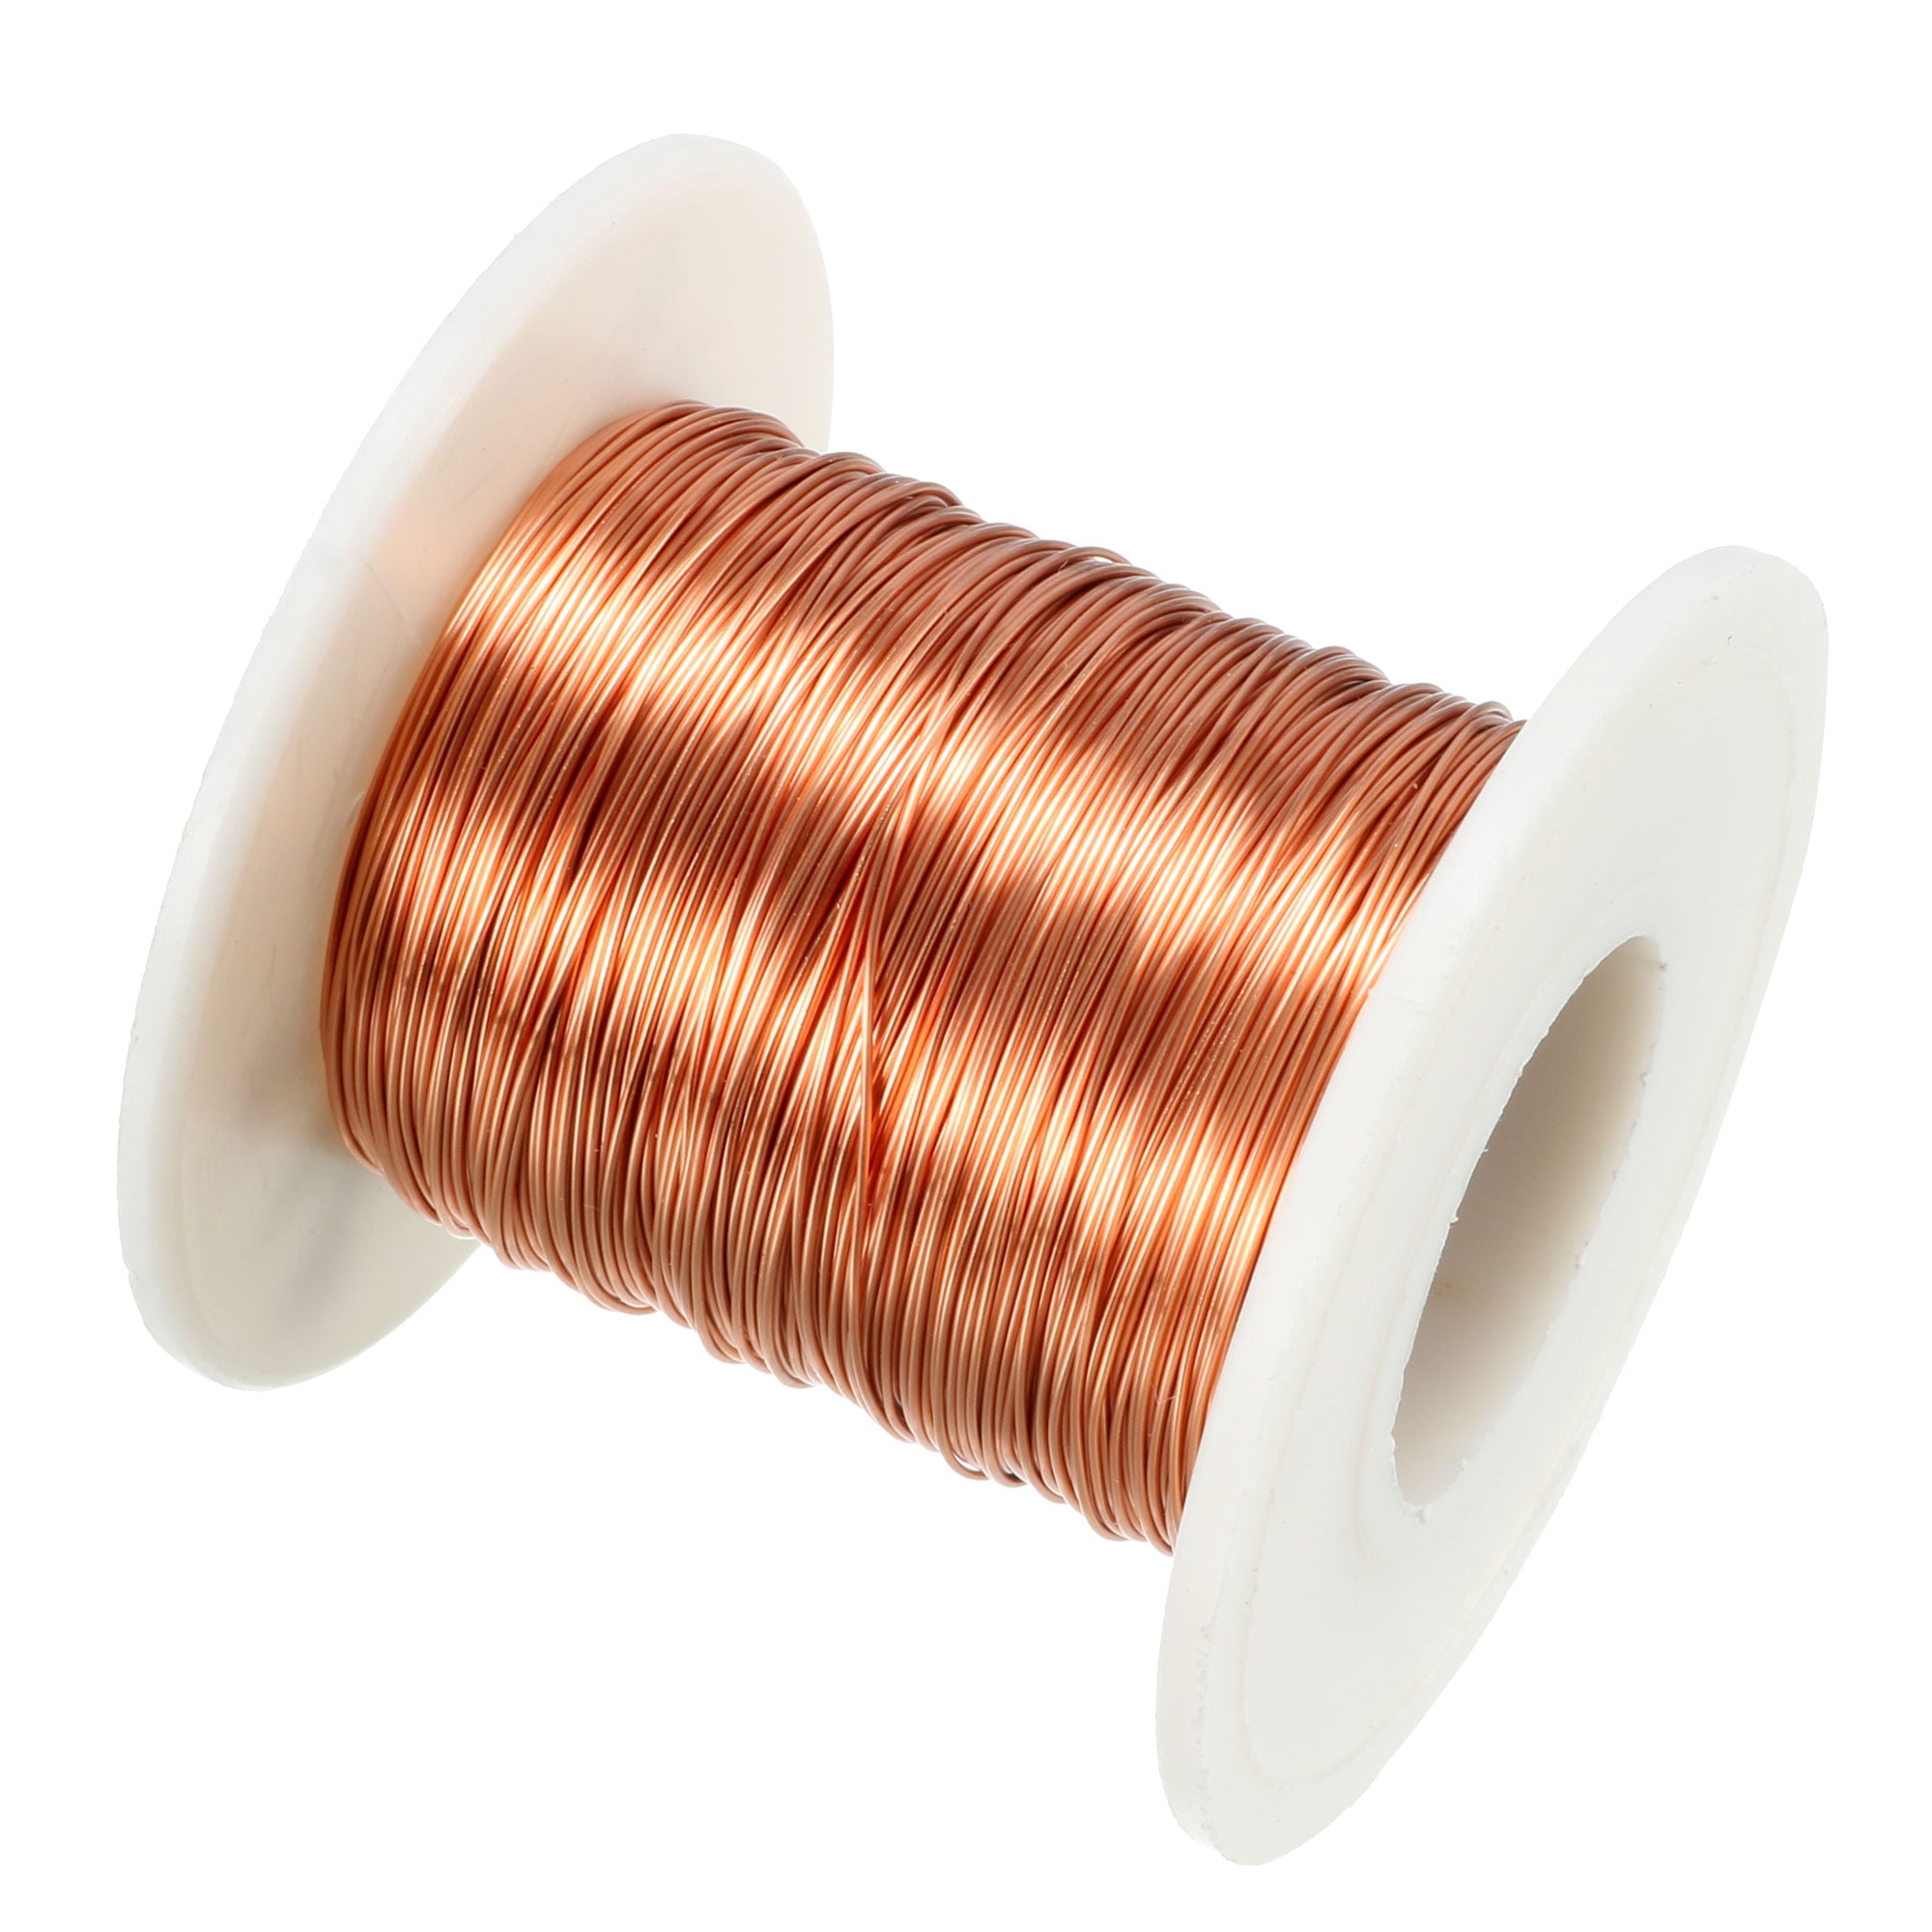 25 AWG Gauge Enameled Copper Magnet Wire 1.0 lbs 1012' Length 0.0188" 155C Red 